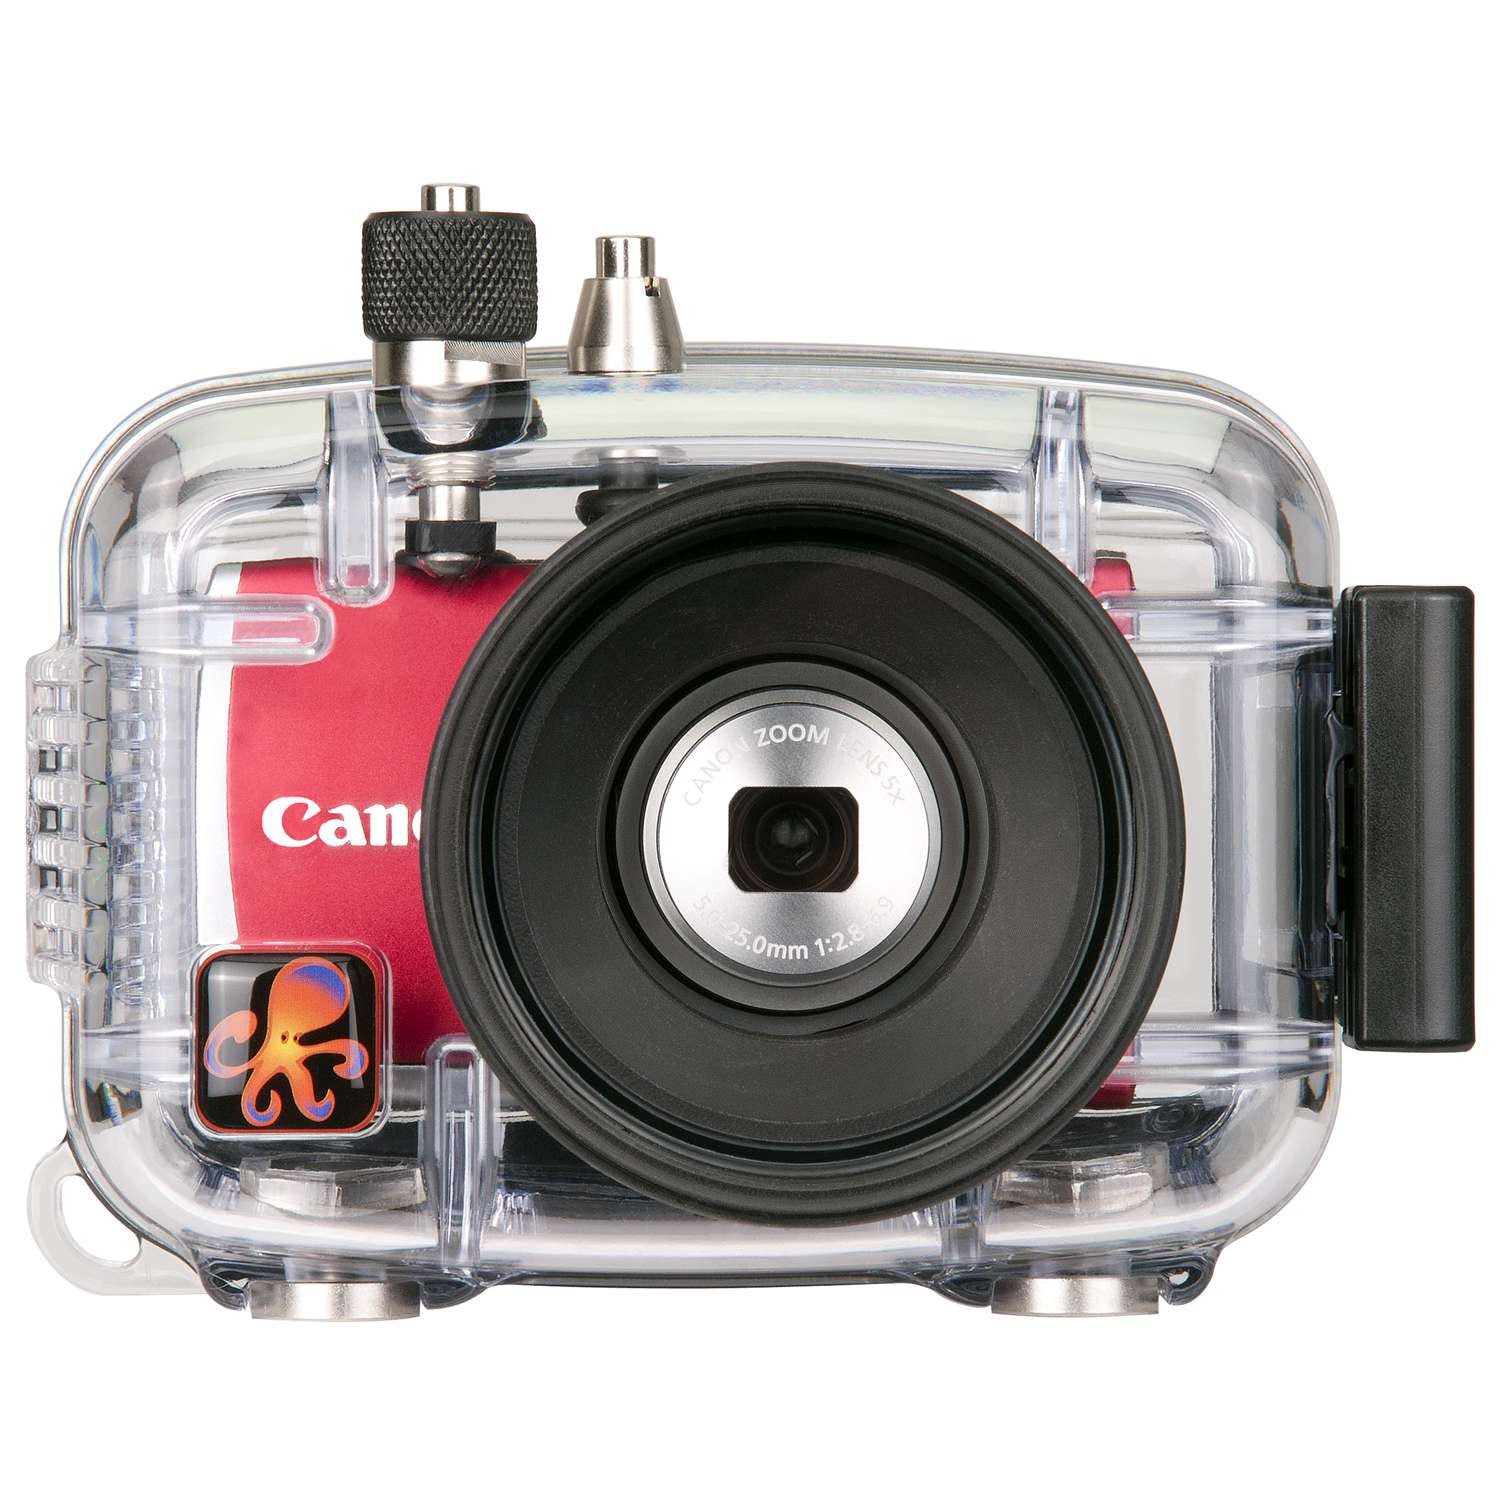 Underwater Housing for Canon PowerShot A2600